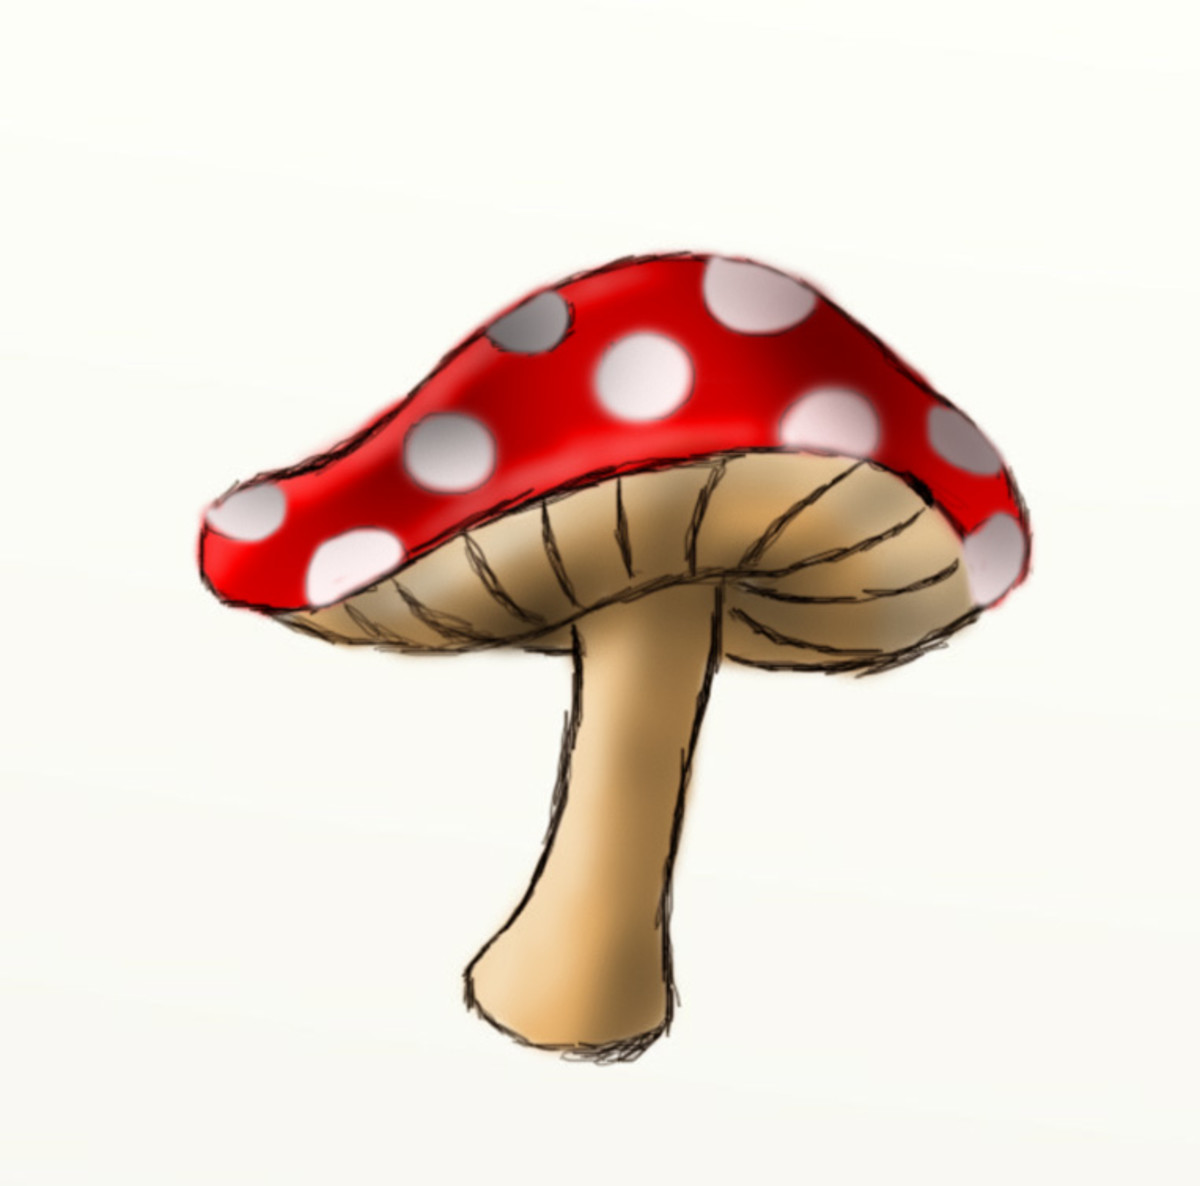 How to draw a mushroom | HubPages